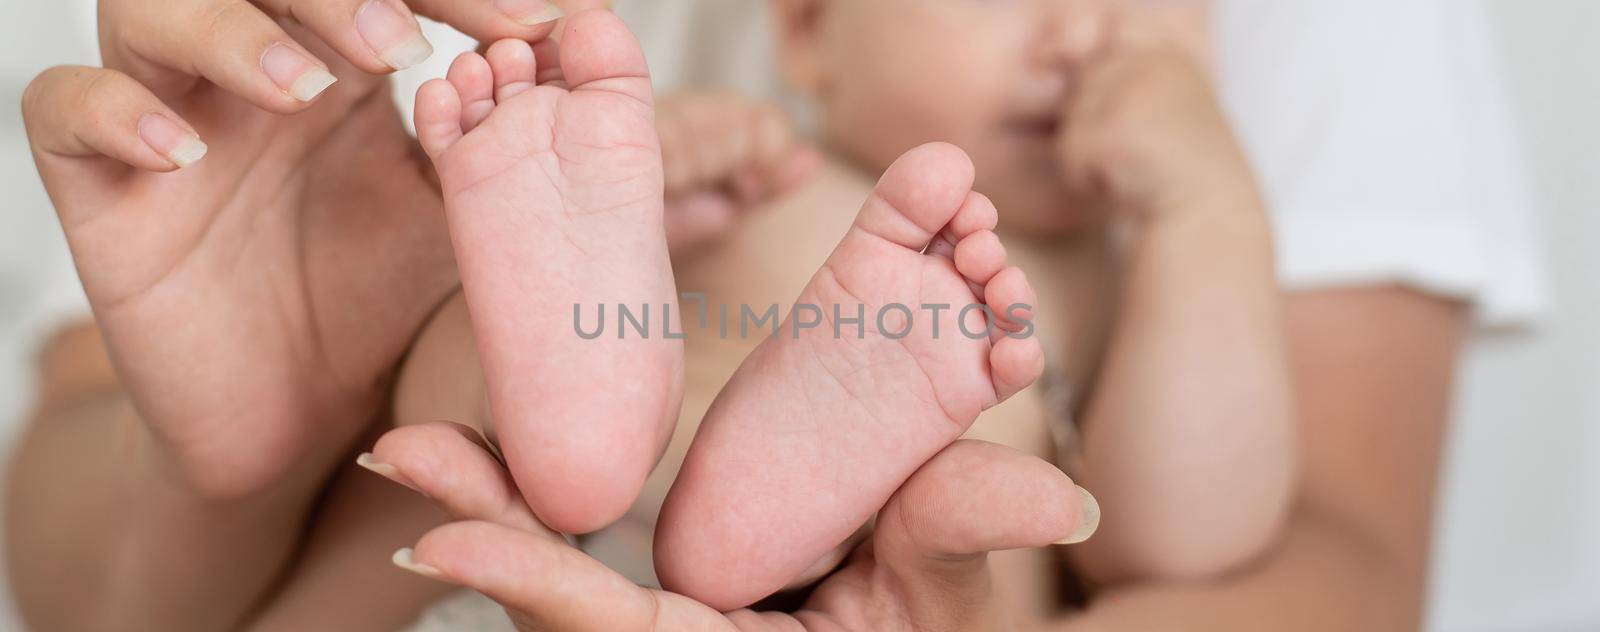 Parent holding in the hands feet of newborn baby by Andelov13